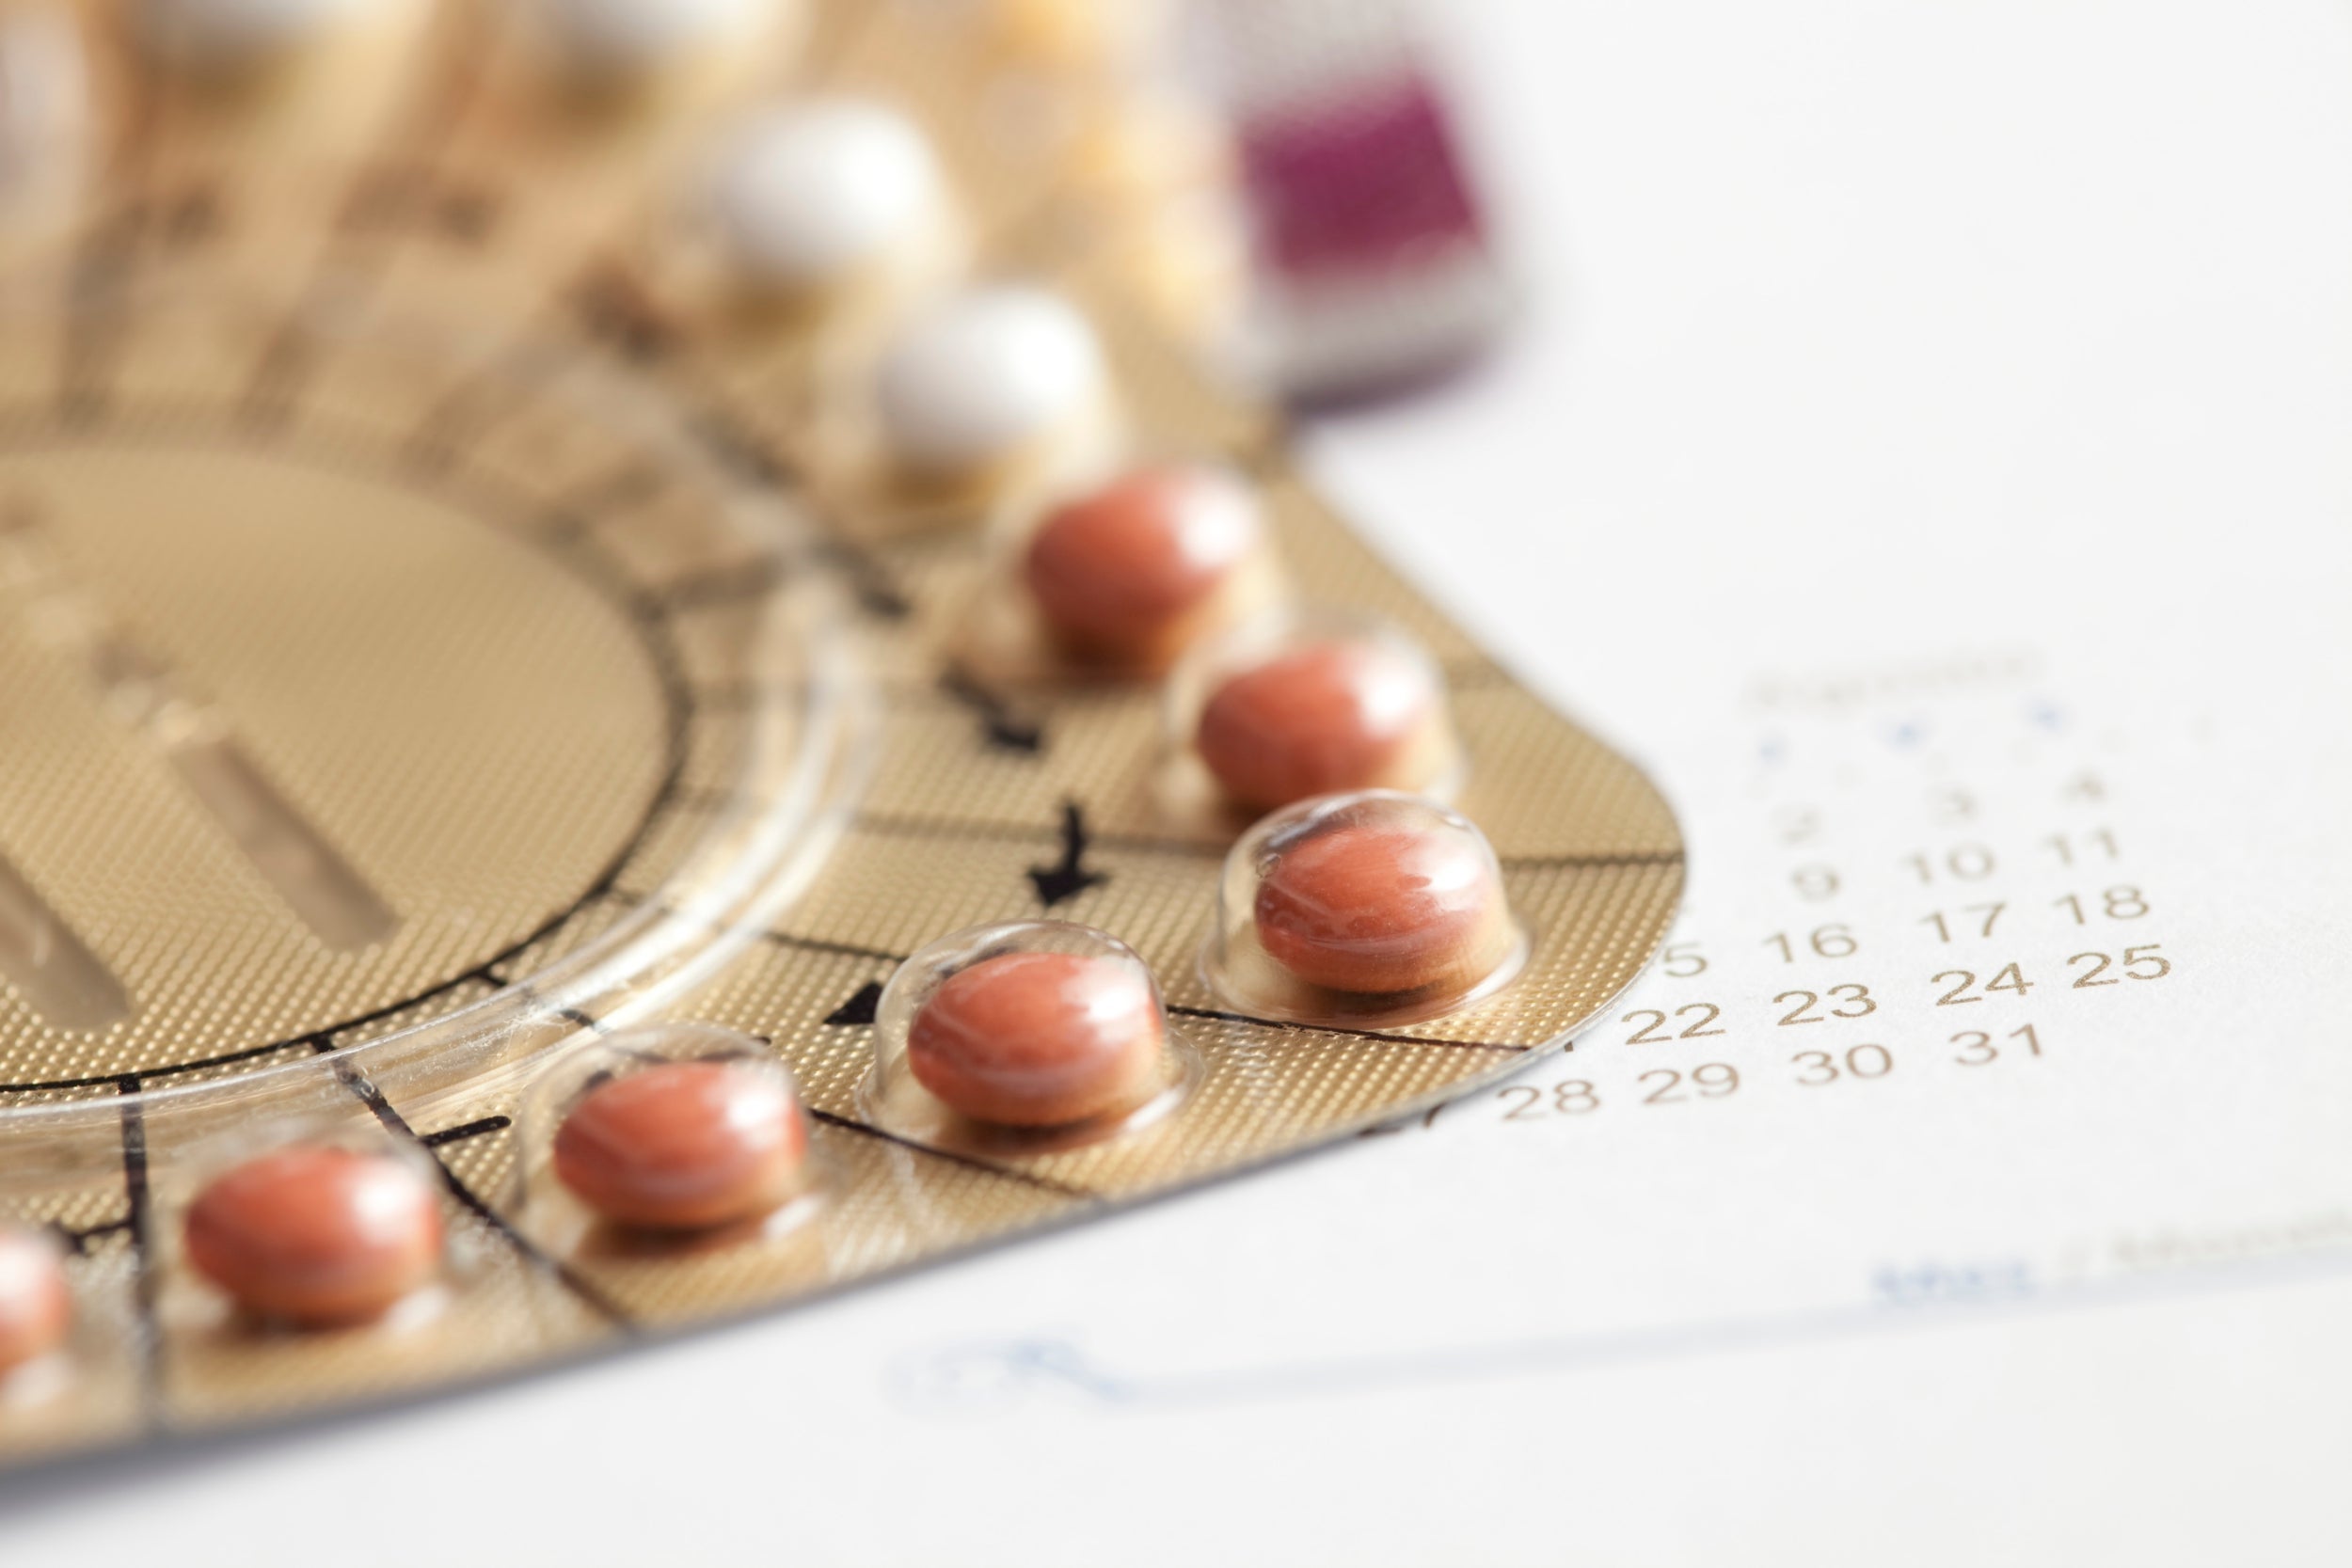 HRT is the most common treatment prescribed by GPs for menopausal women